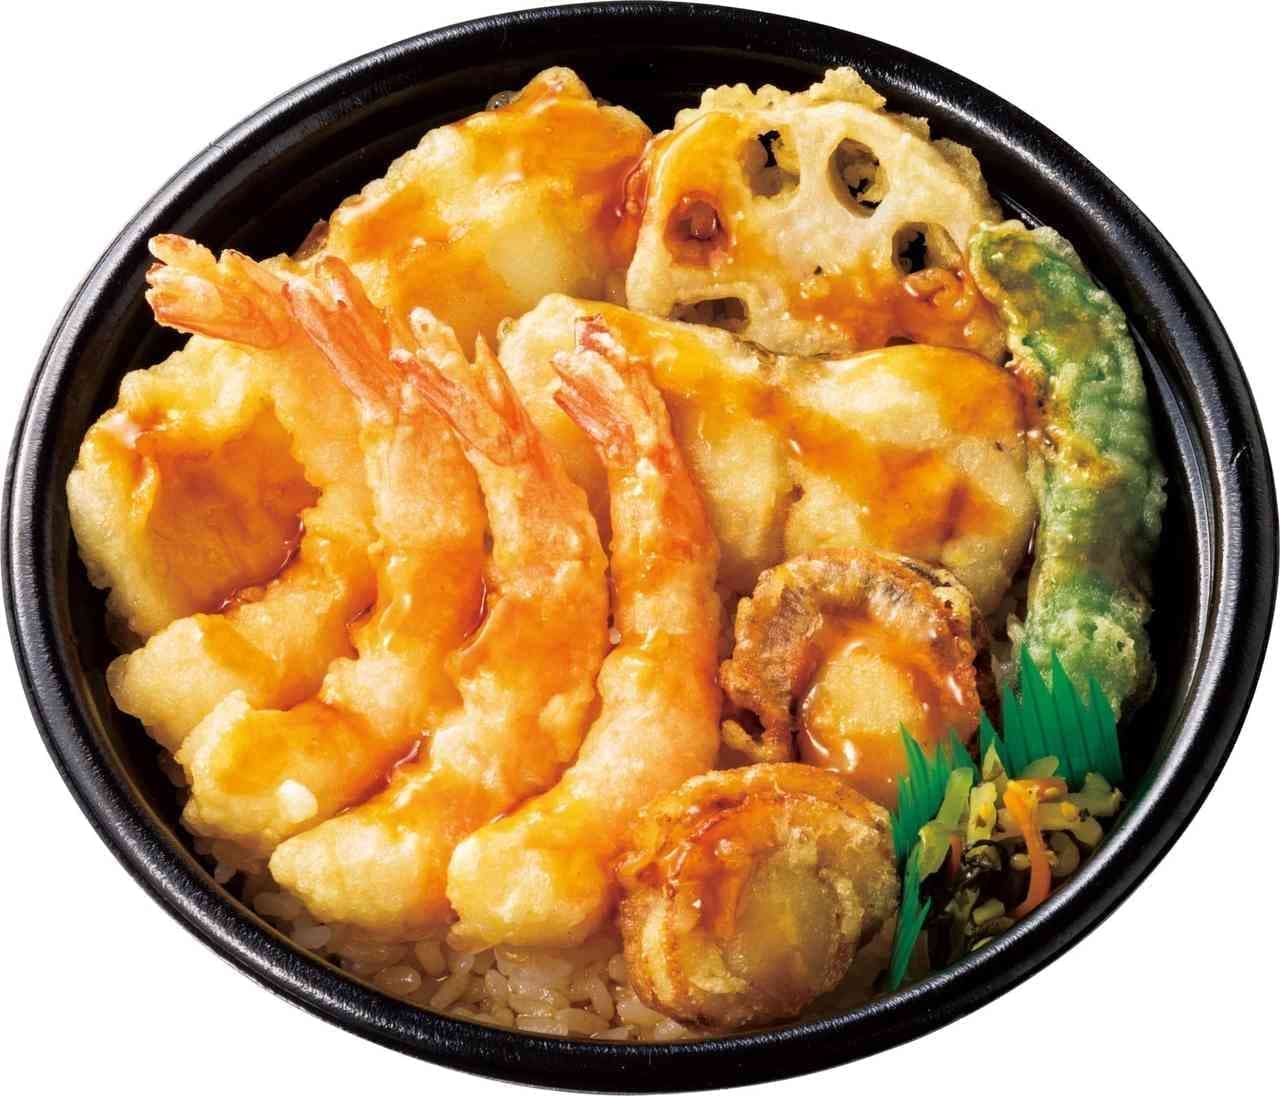 Hotto Motto "Kaisen Tendon" (top bowl of rice topped with seafood)